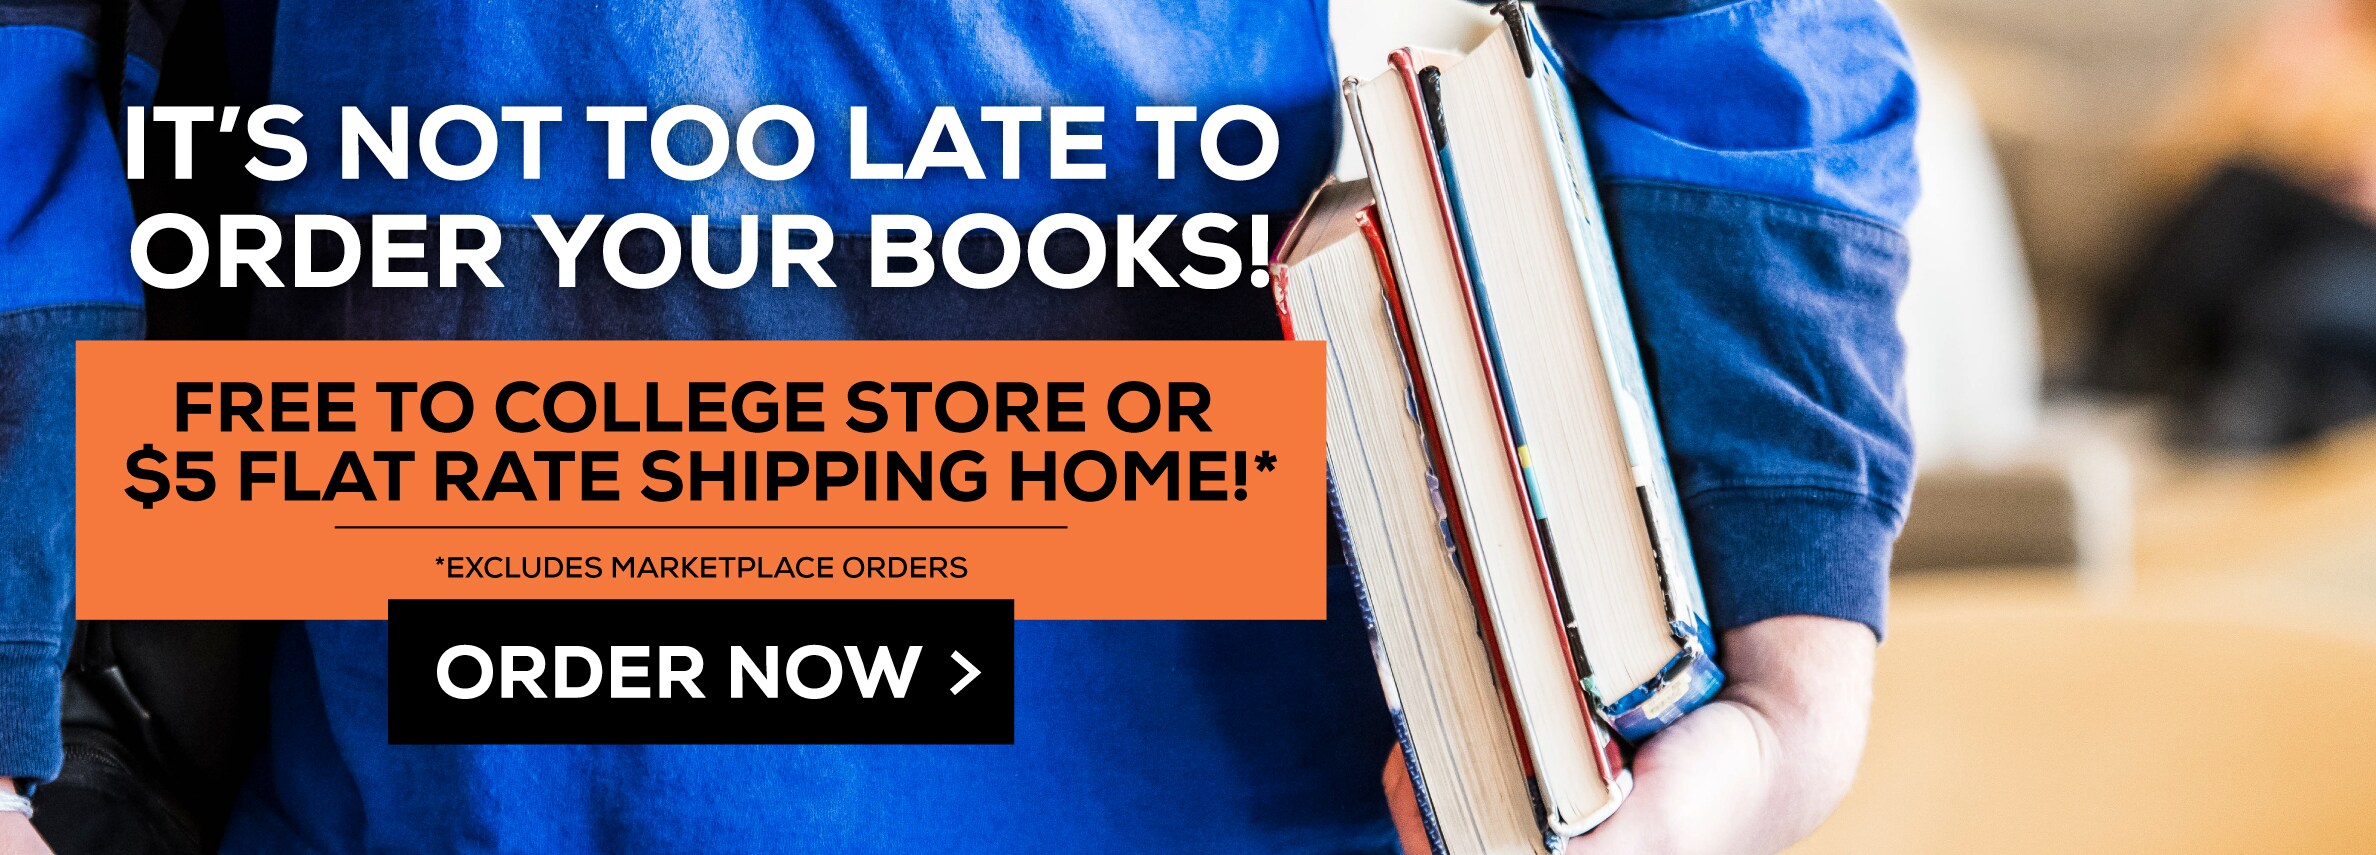 It's not too late to order your textbooks! Free to College Store or  $5 Flat Rate shipping home.* Excludes Marketplace Purchases. Order now (new tab)